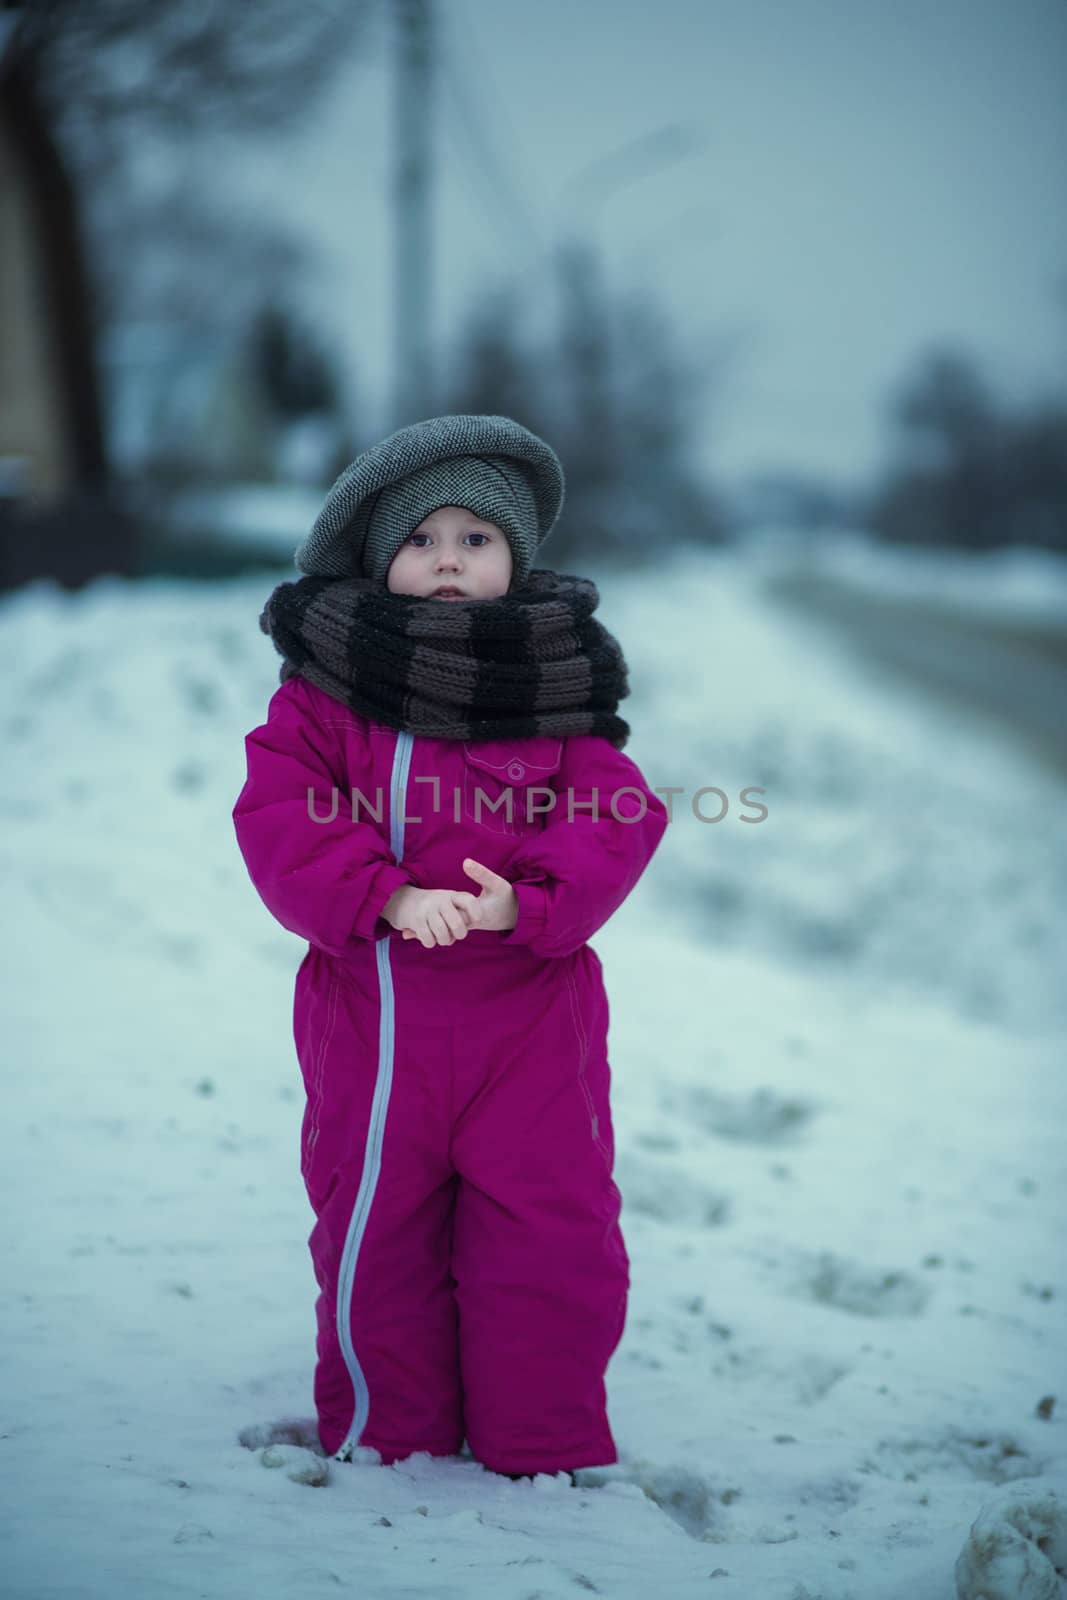 .A little girl stands in the snow by the road in the evening  by galinasharapova